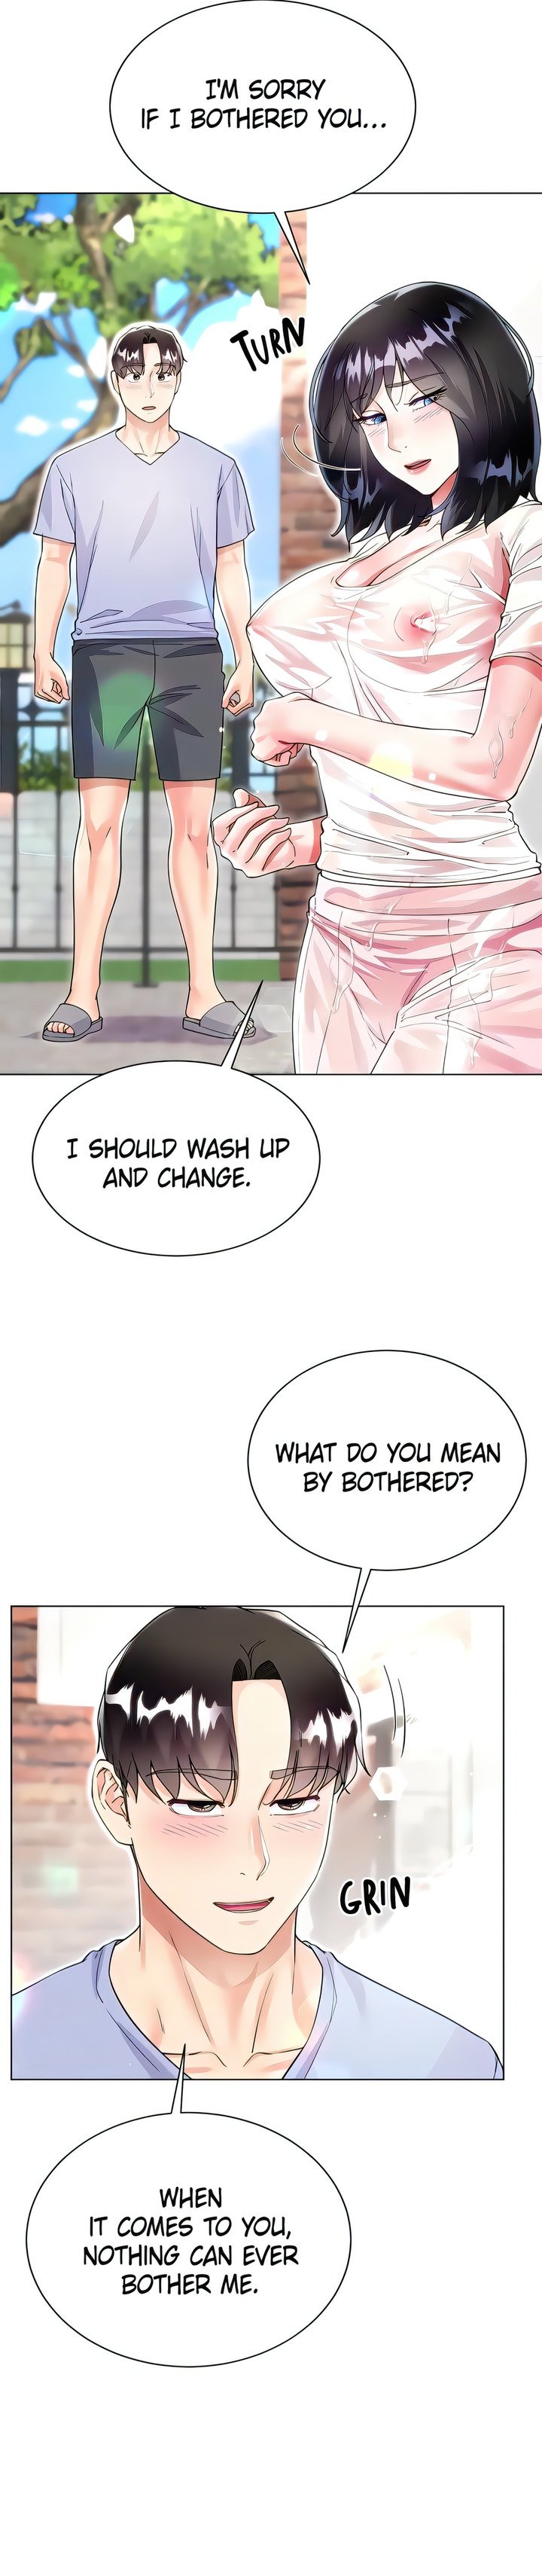 my-sister-in-laws-skirt-chap-47-9